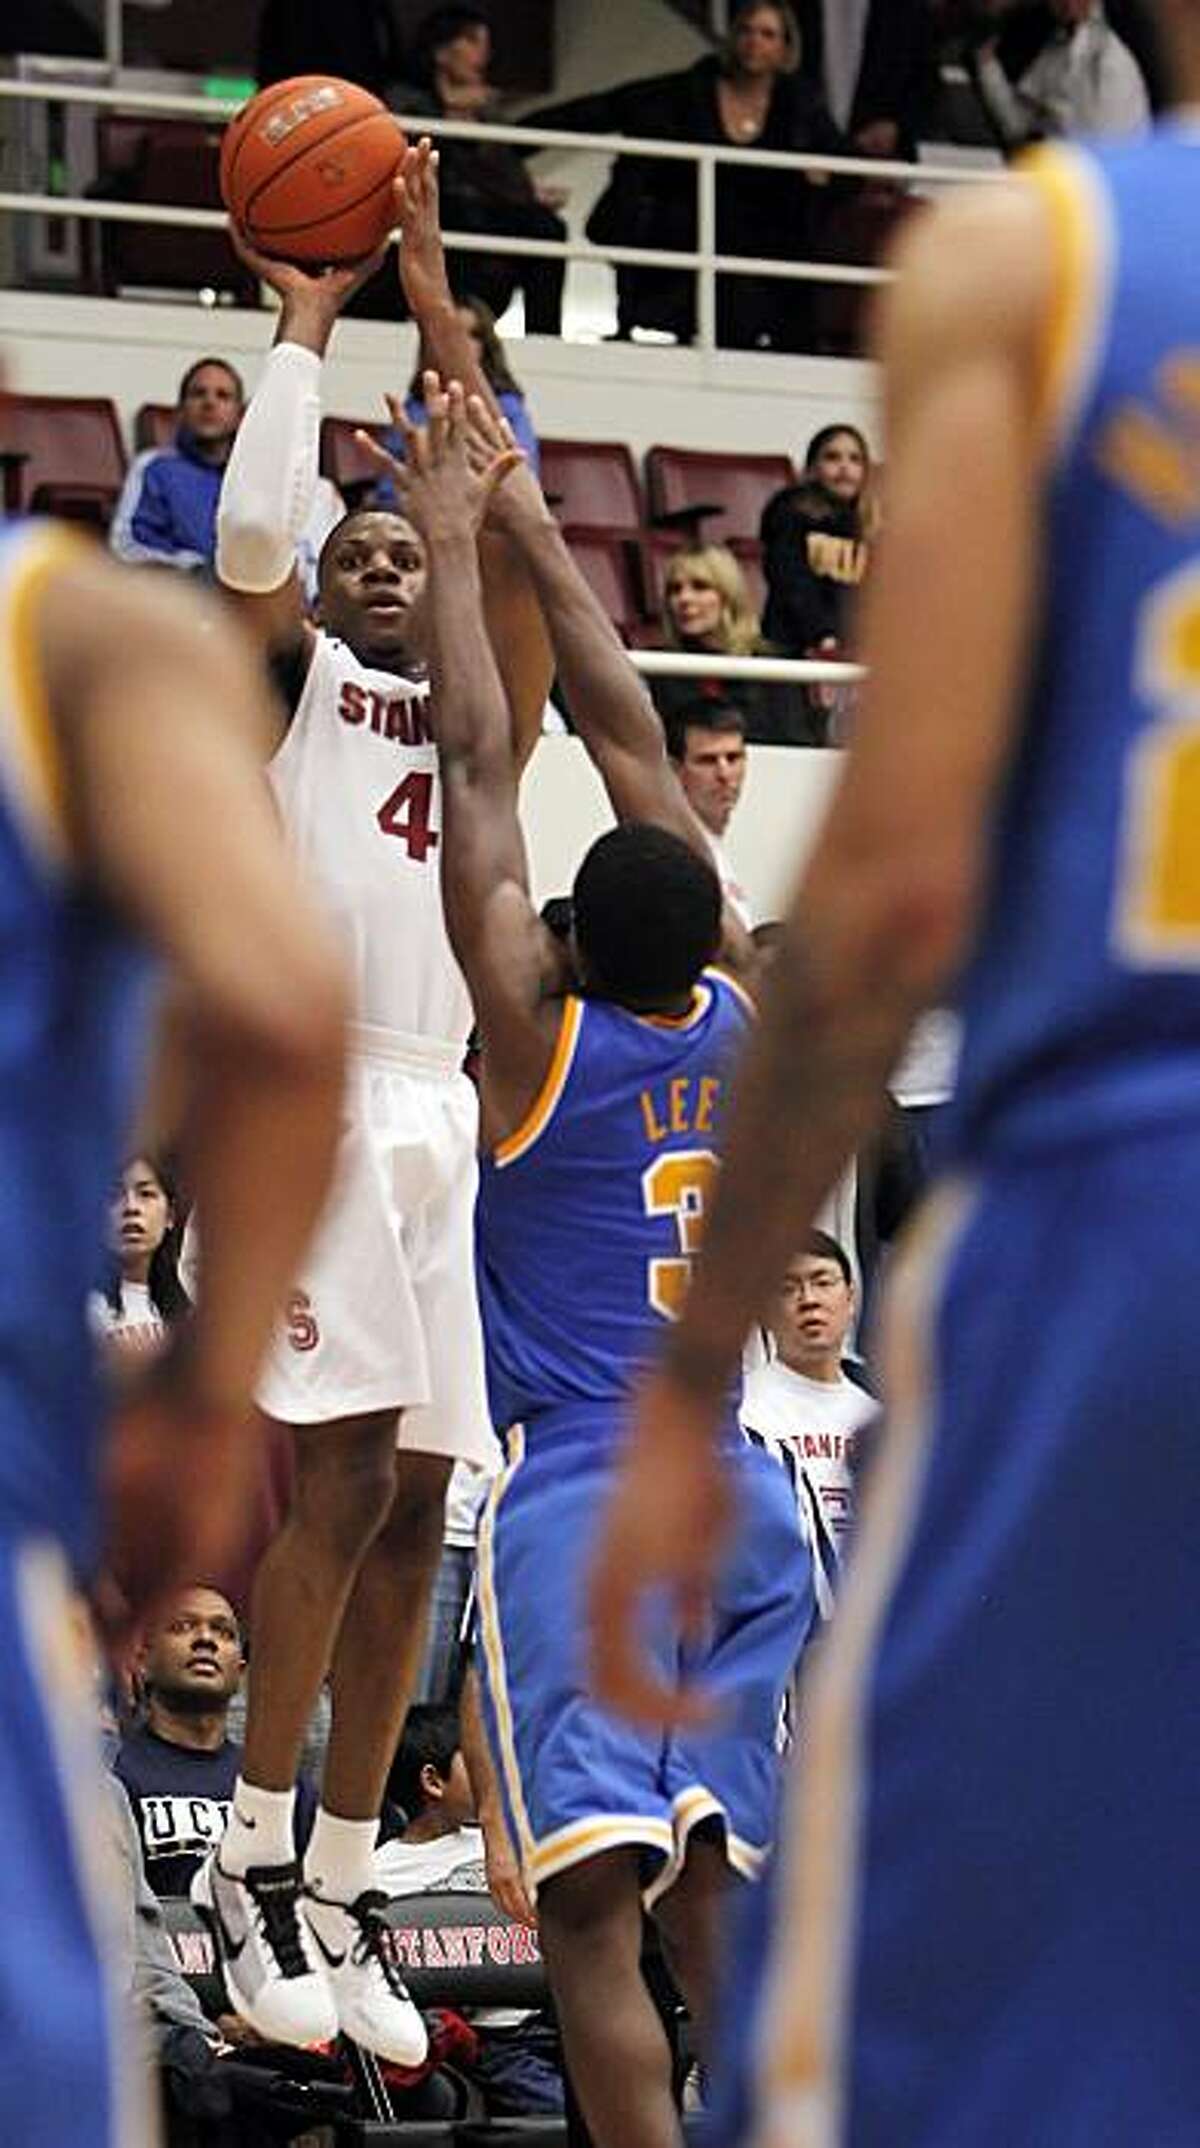 Jeremy Green puts up a three pointer in the final seconds of the game. The Cardinal came up short against UCLA, losing 69-65, despite a last minute rally. The Stanford men played the UCLA Bruins at Maples Pavilion at Stanford, Calif., on Thursday, February 17, 2011.